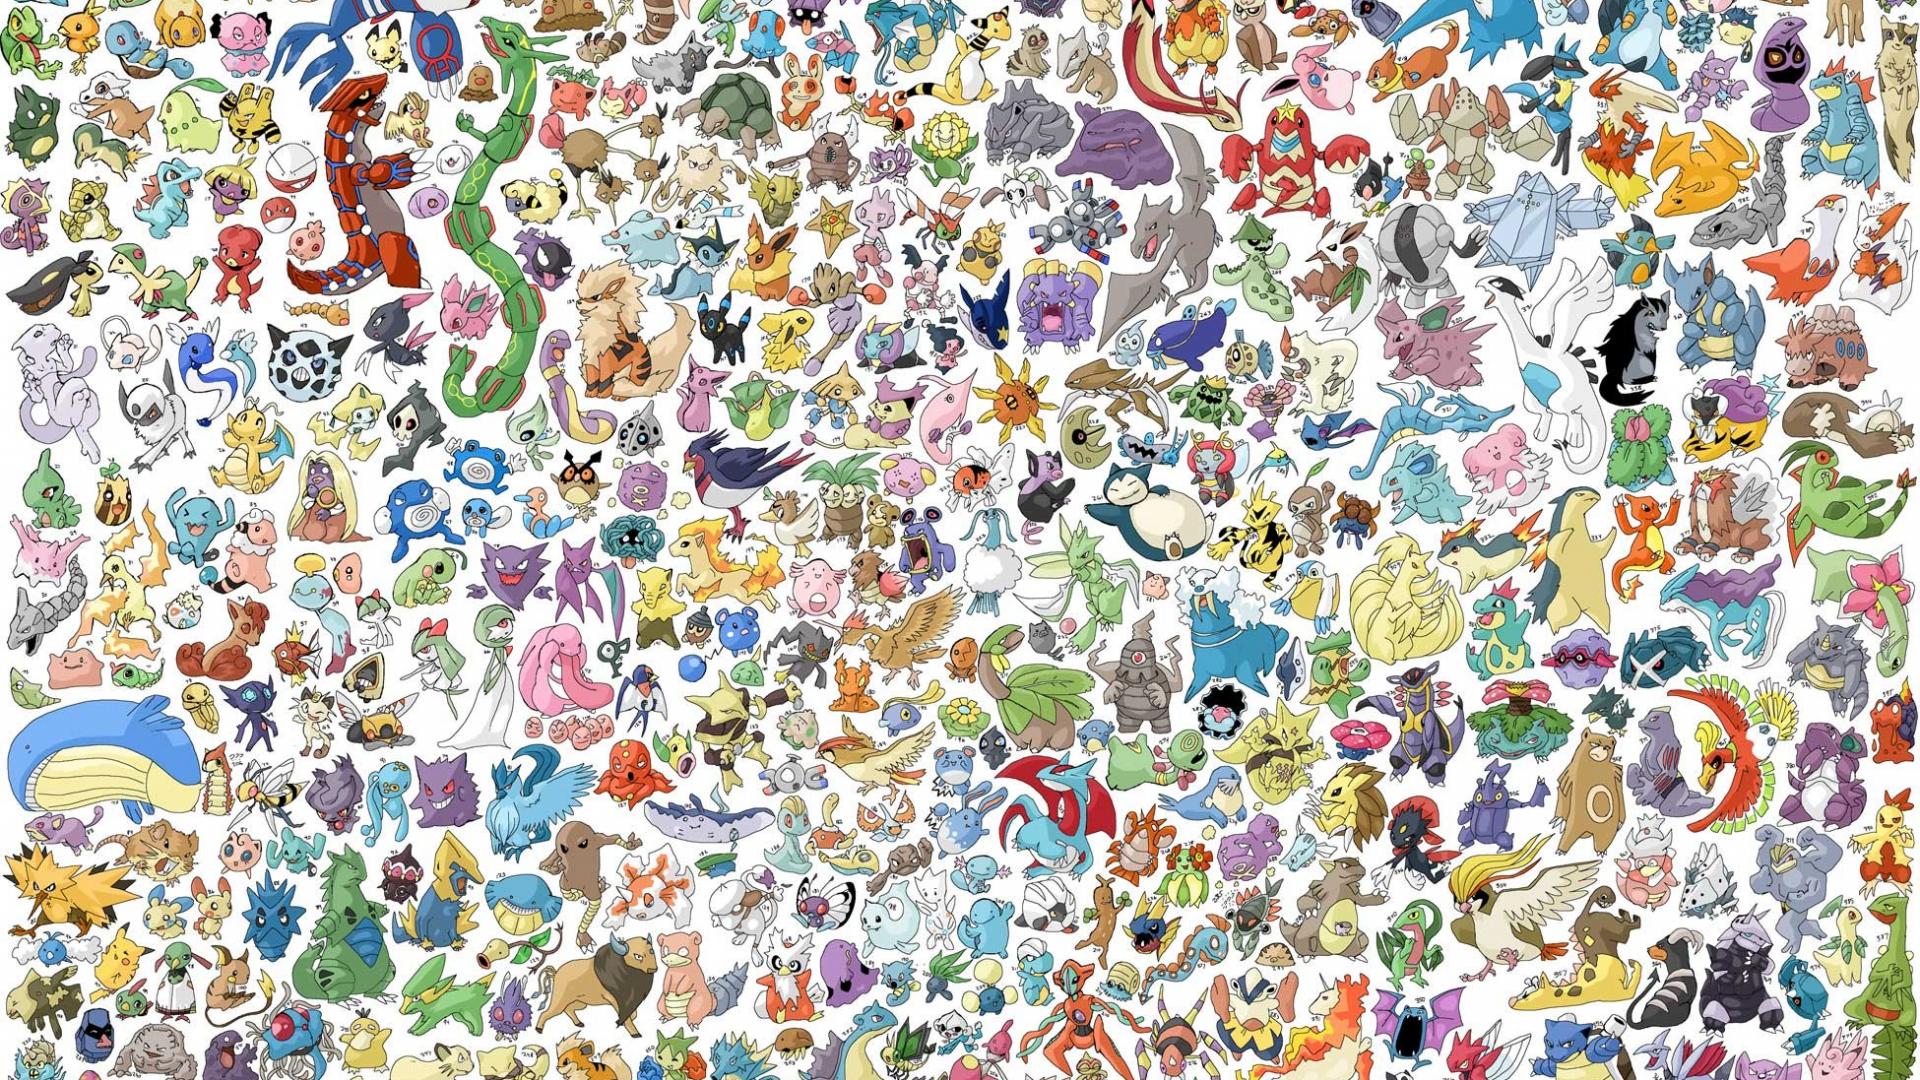 Cool Pokemon Wallpaper For Puter Image Amp Pictures Becuo